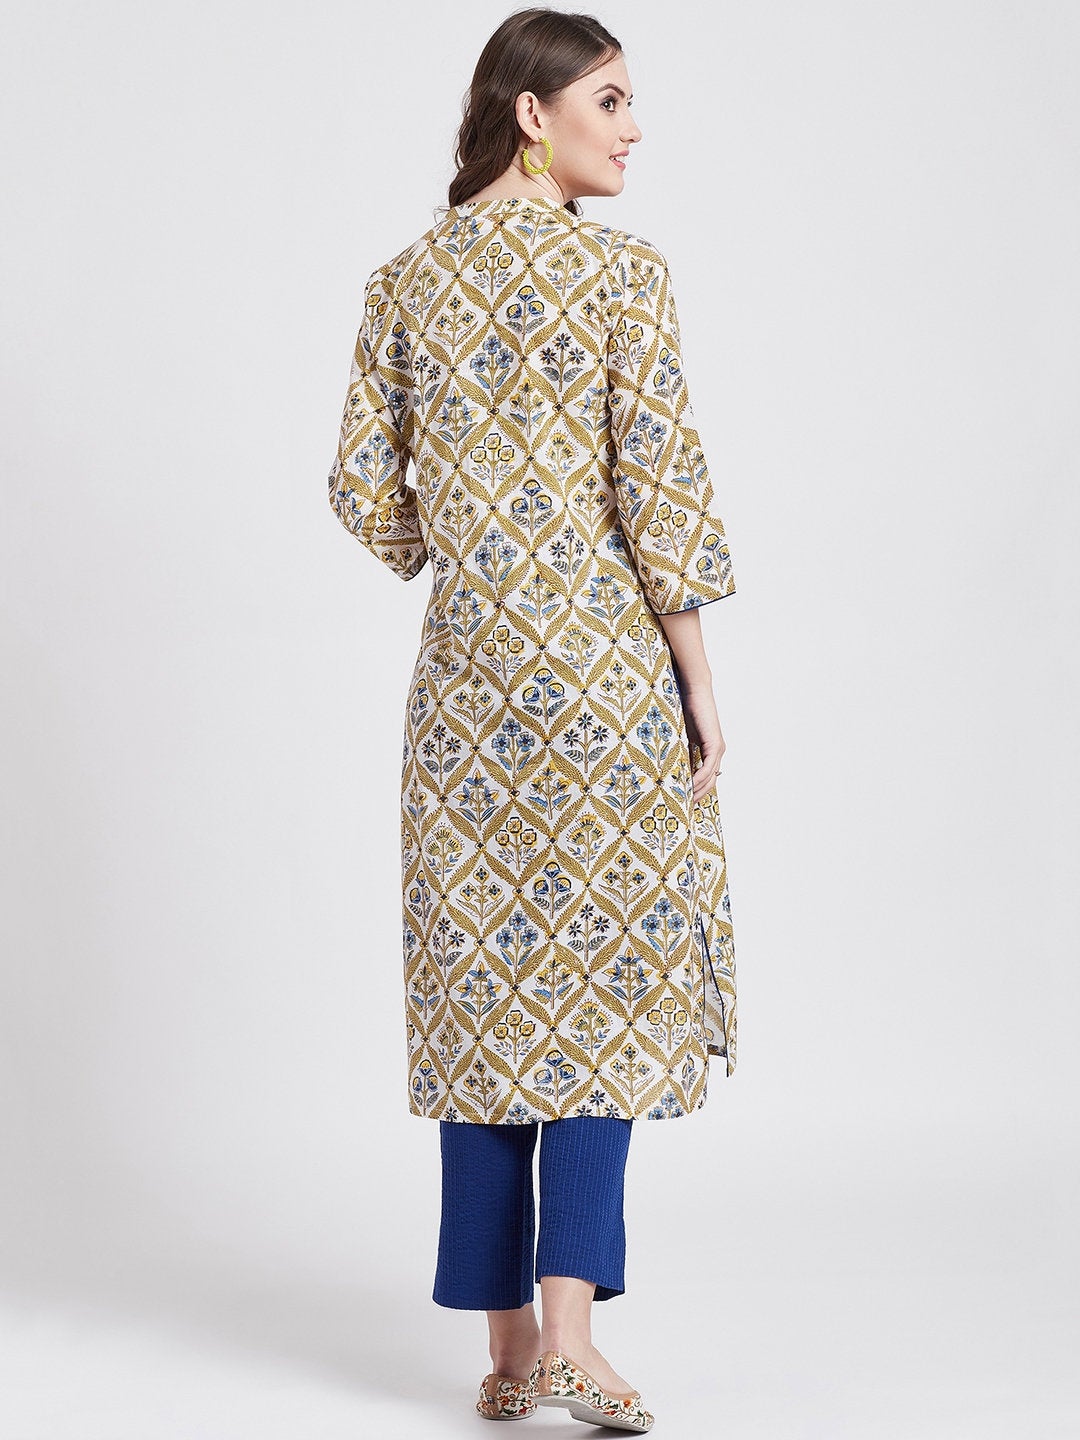 Hand block printed white kurta with self embroided blue cotton straight pants